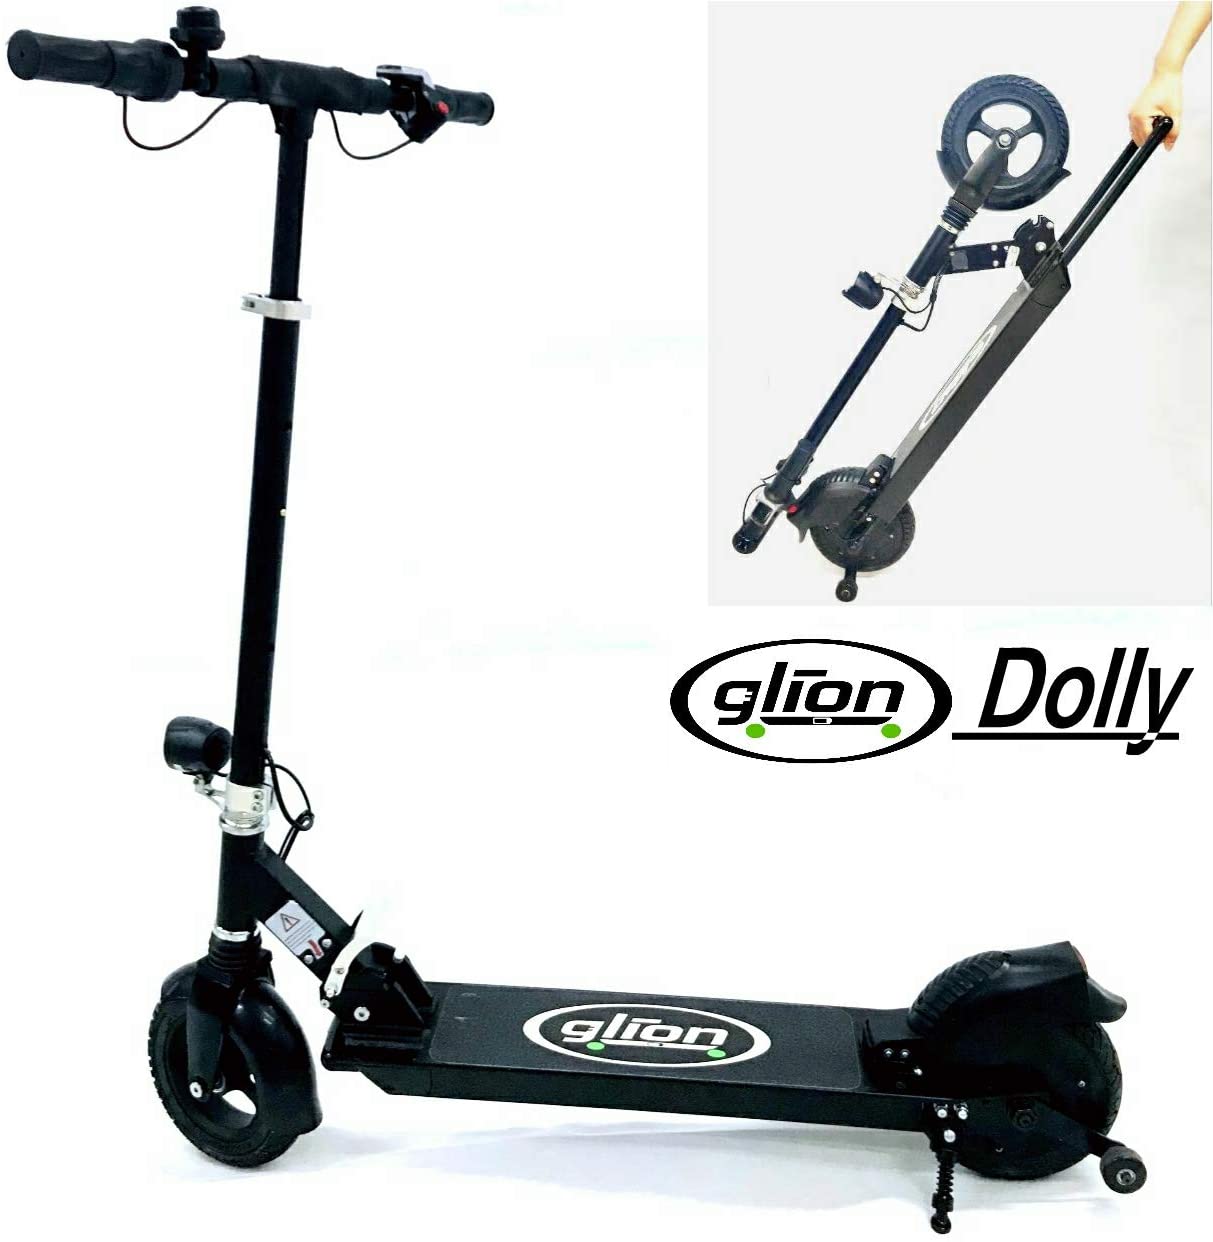 Glion Dolly Electric Scooter For Adults Over 250 lbs